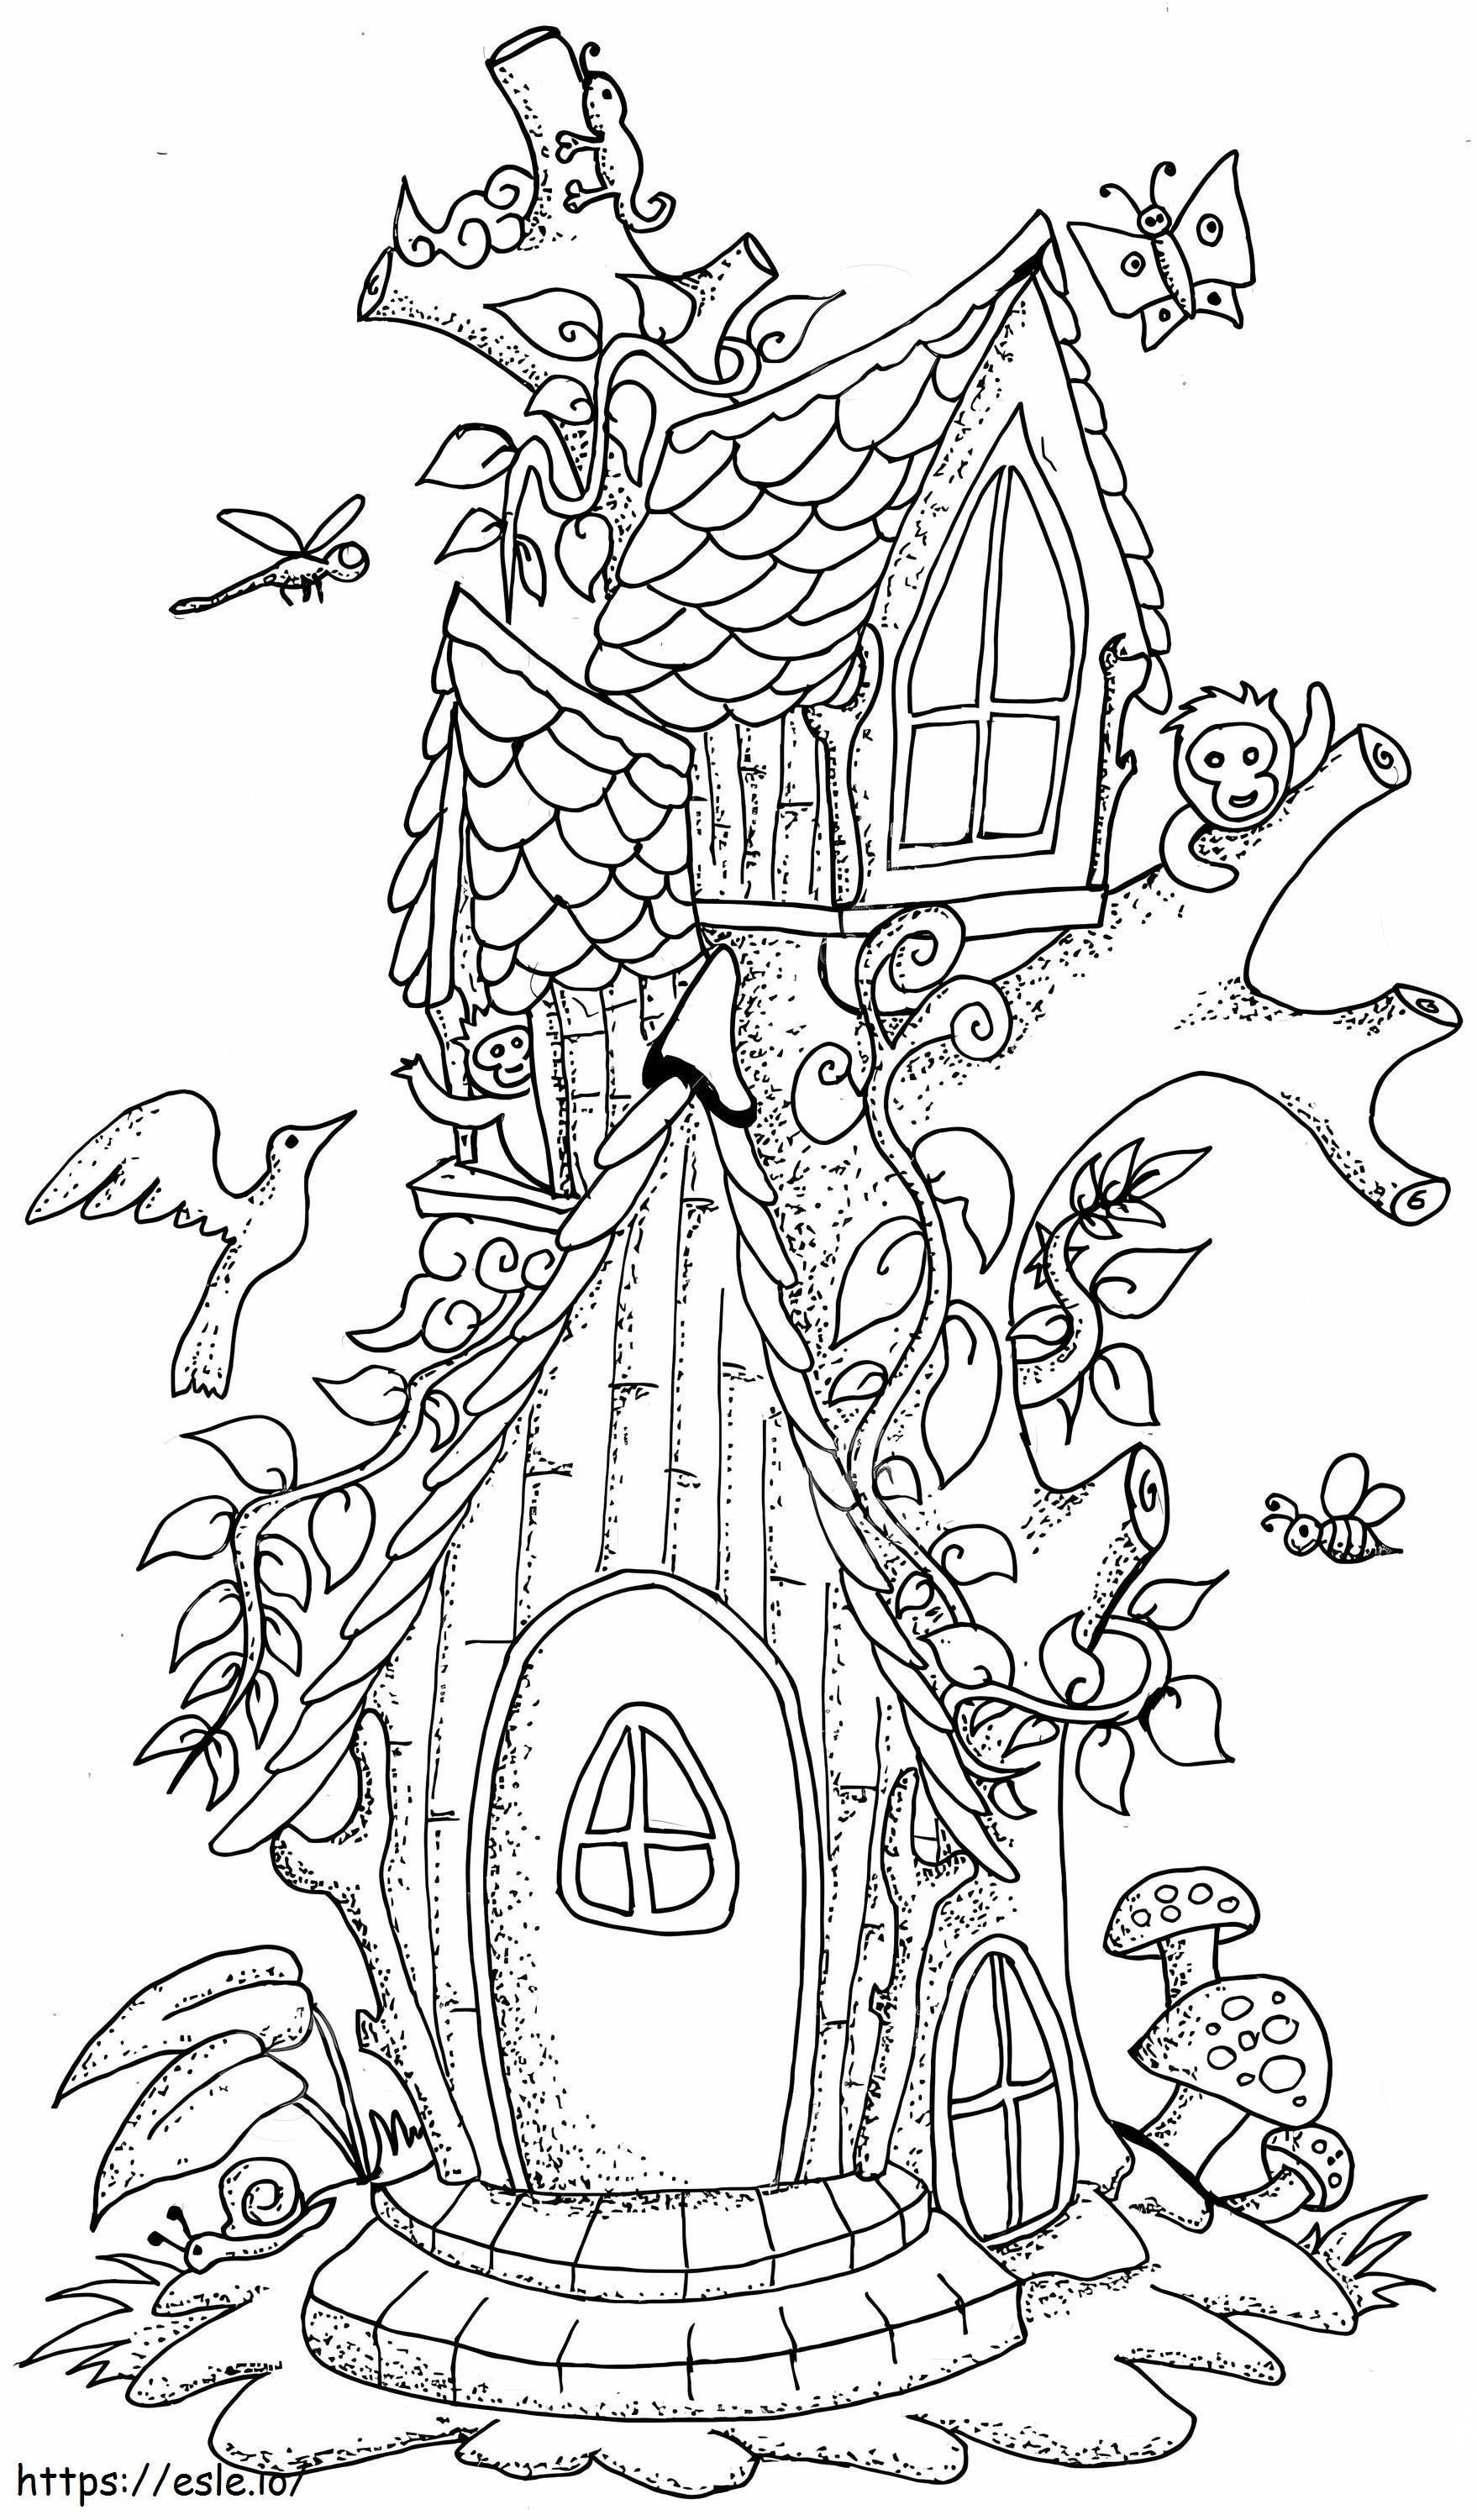 Fairy And Animal House coloring page